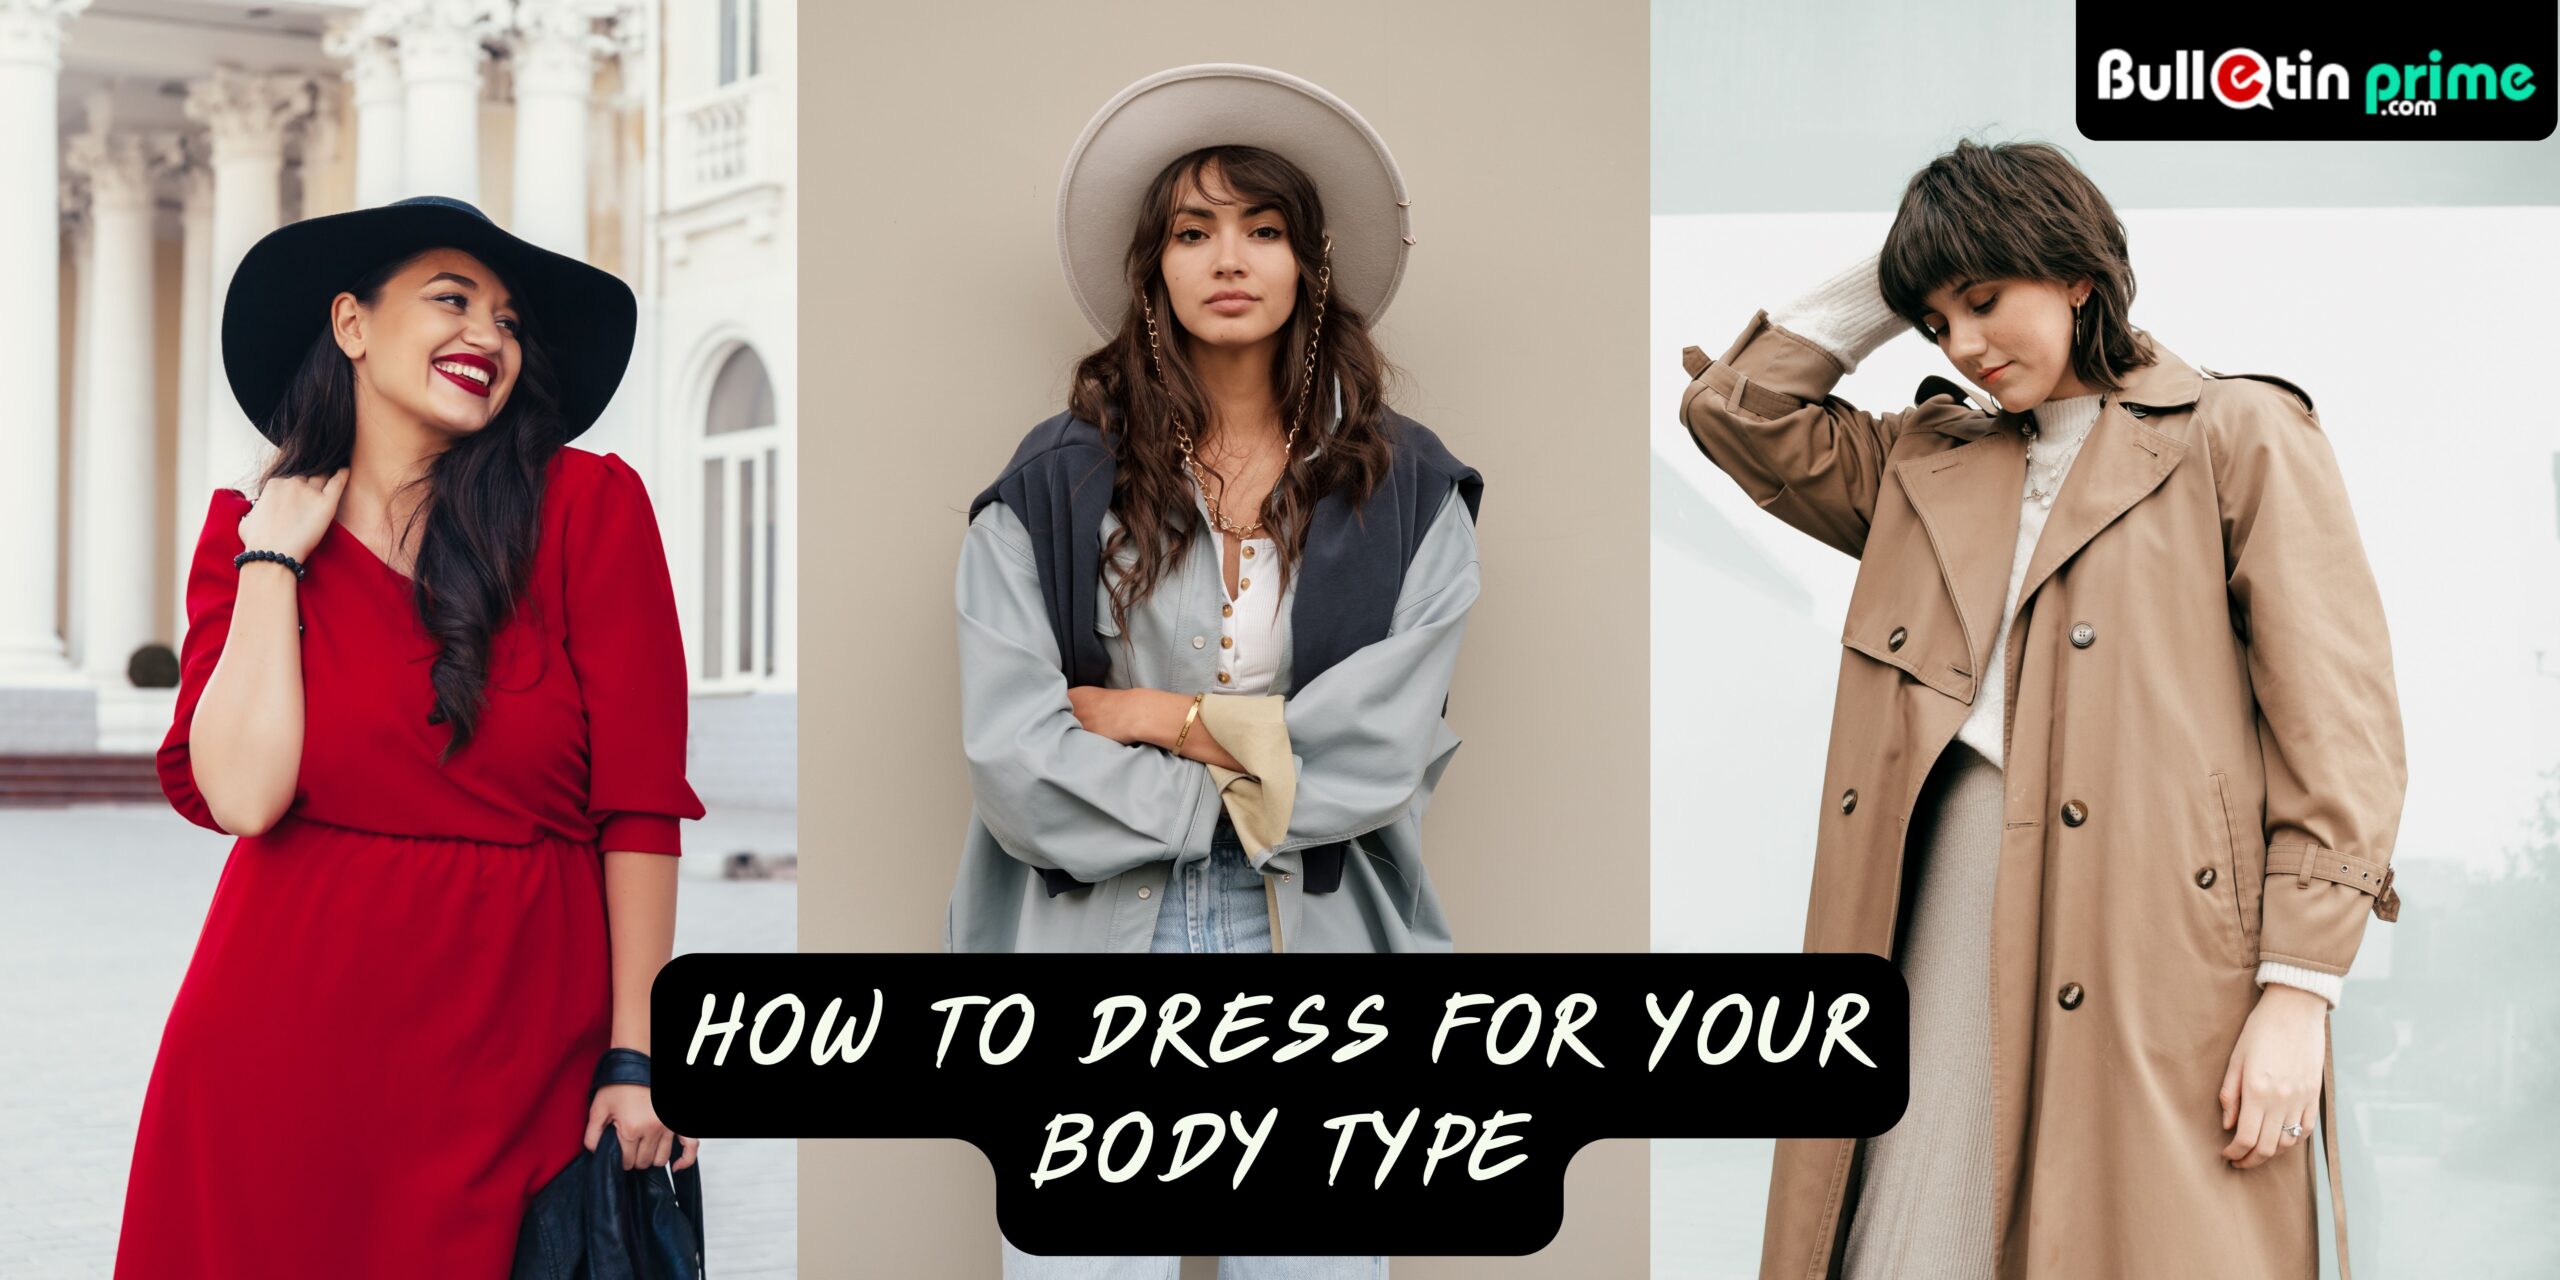 Tips on How to Dress for Your Body Type